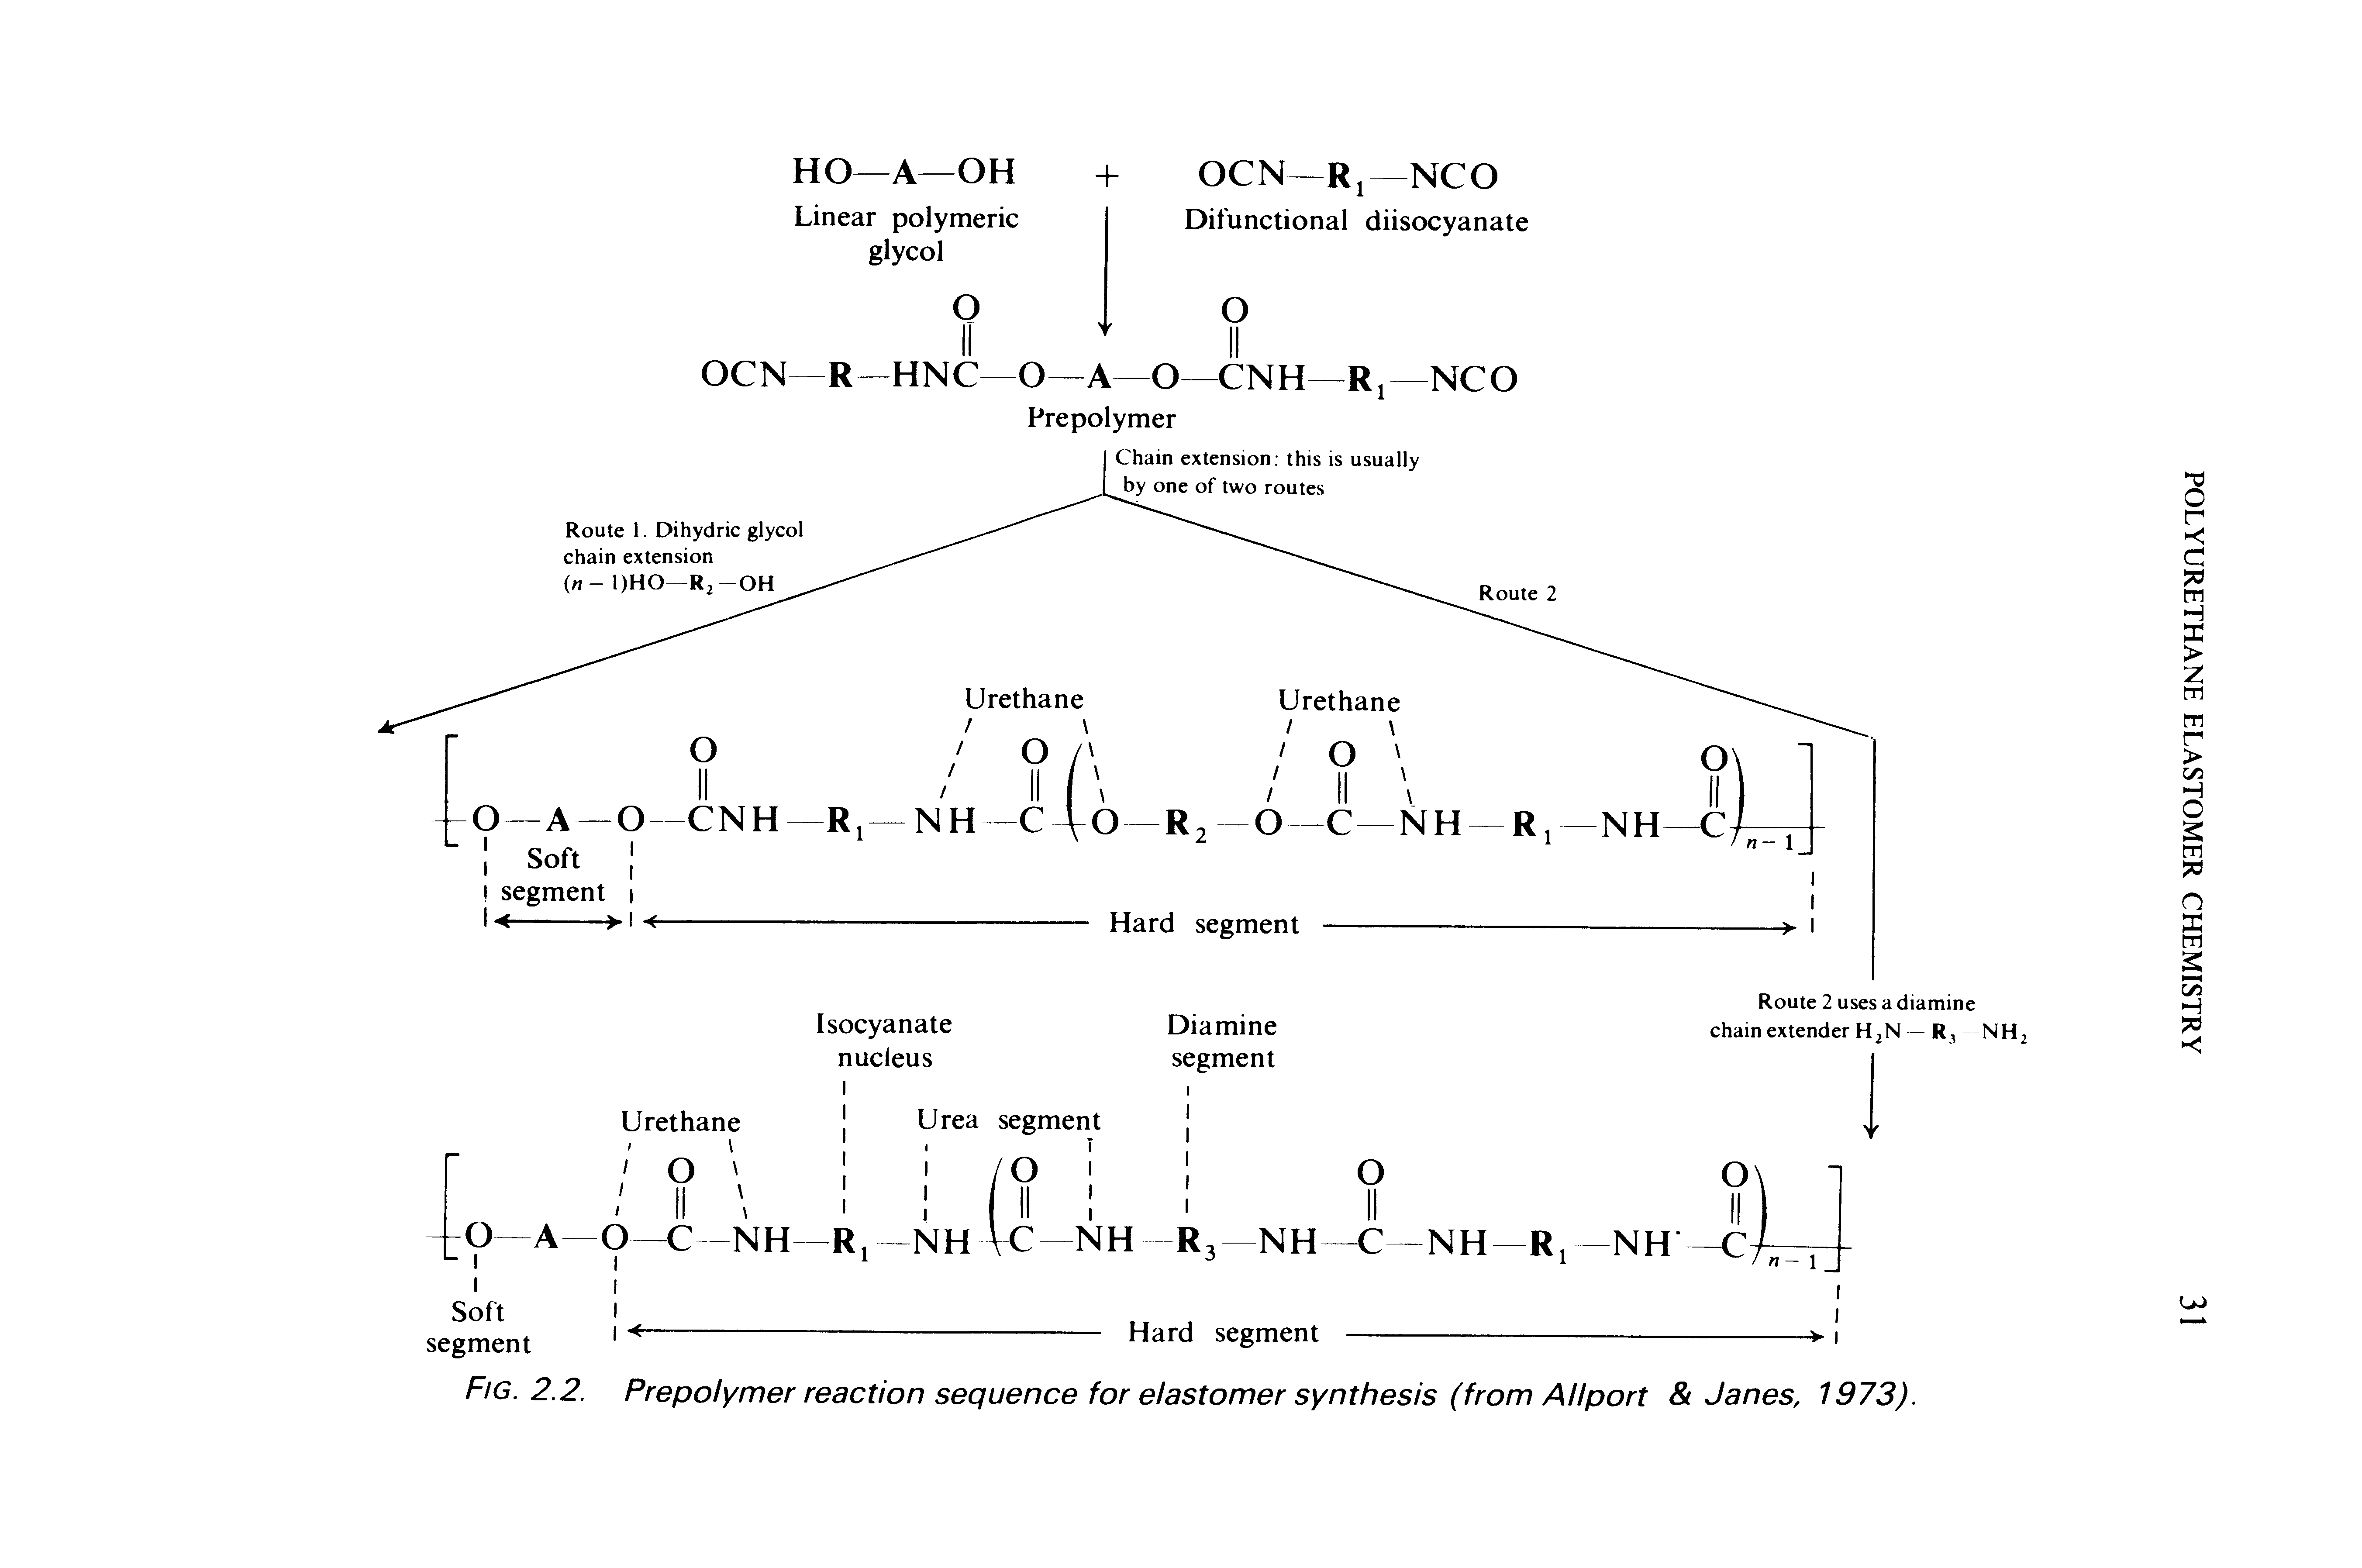 Fig. 2.2. Prepolymer reaction sequence for elastomer synthesis (from AHport Janes, 1973).